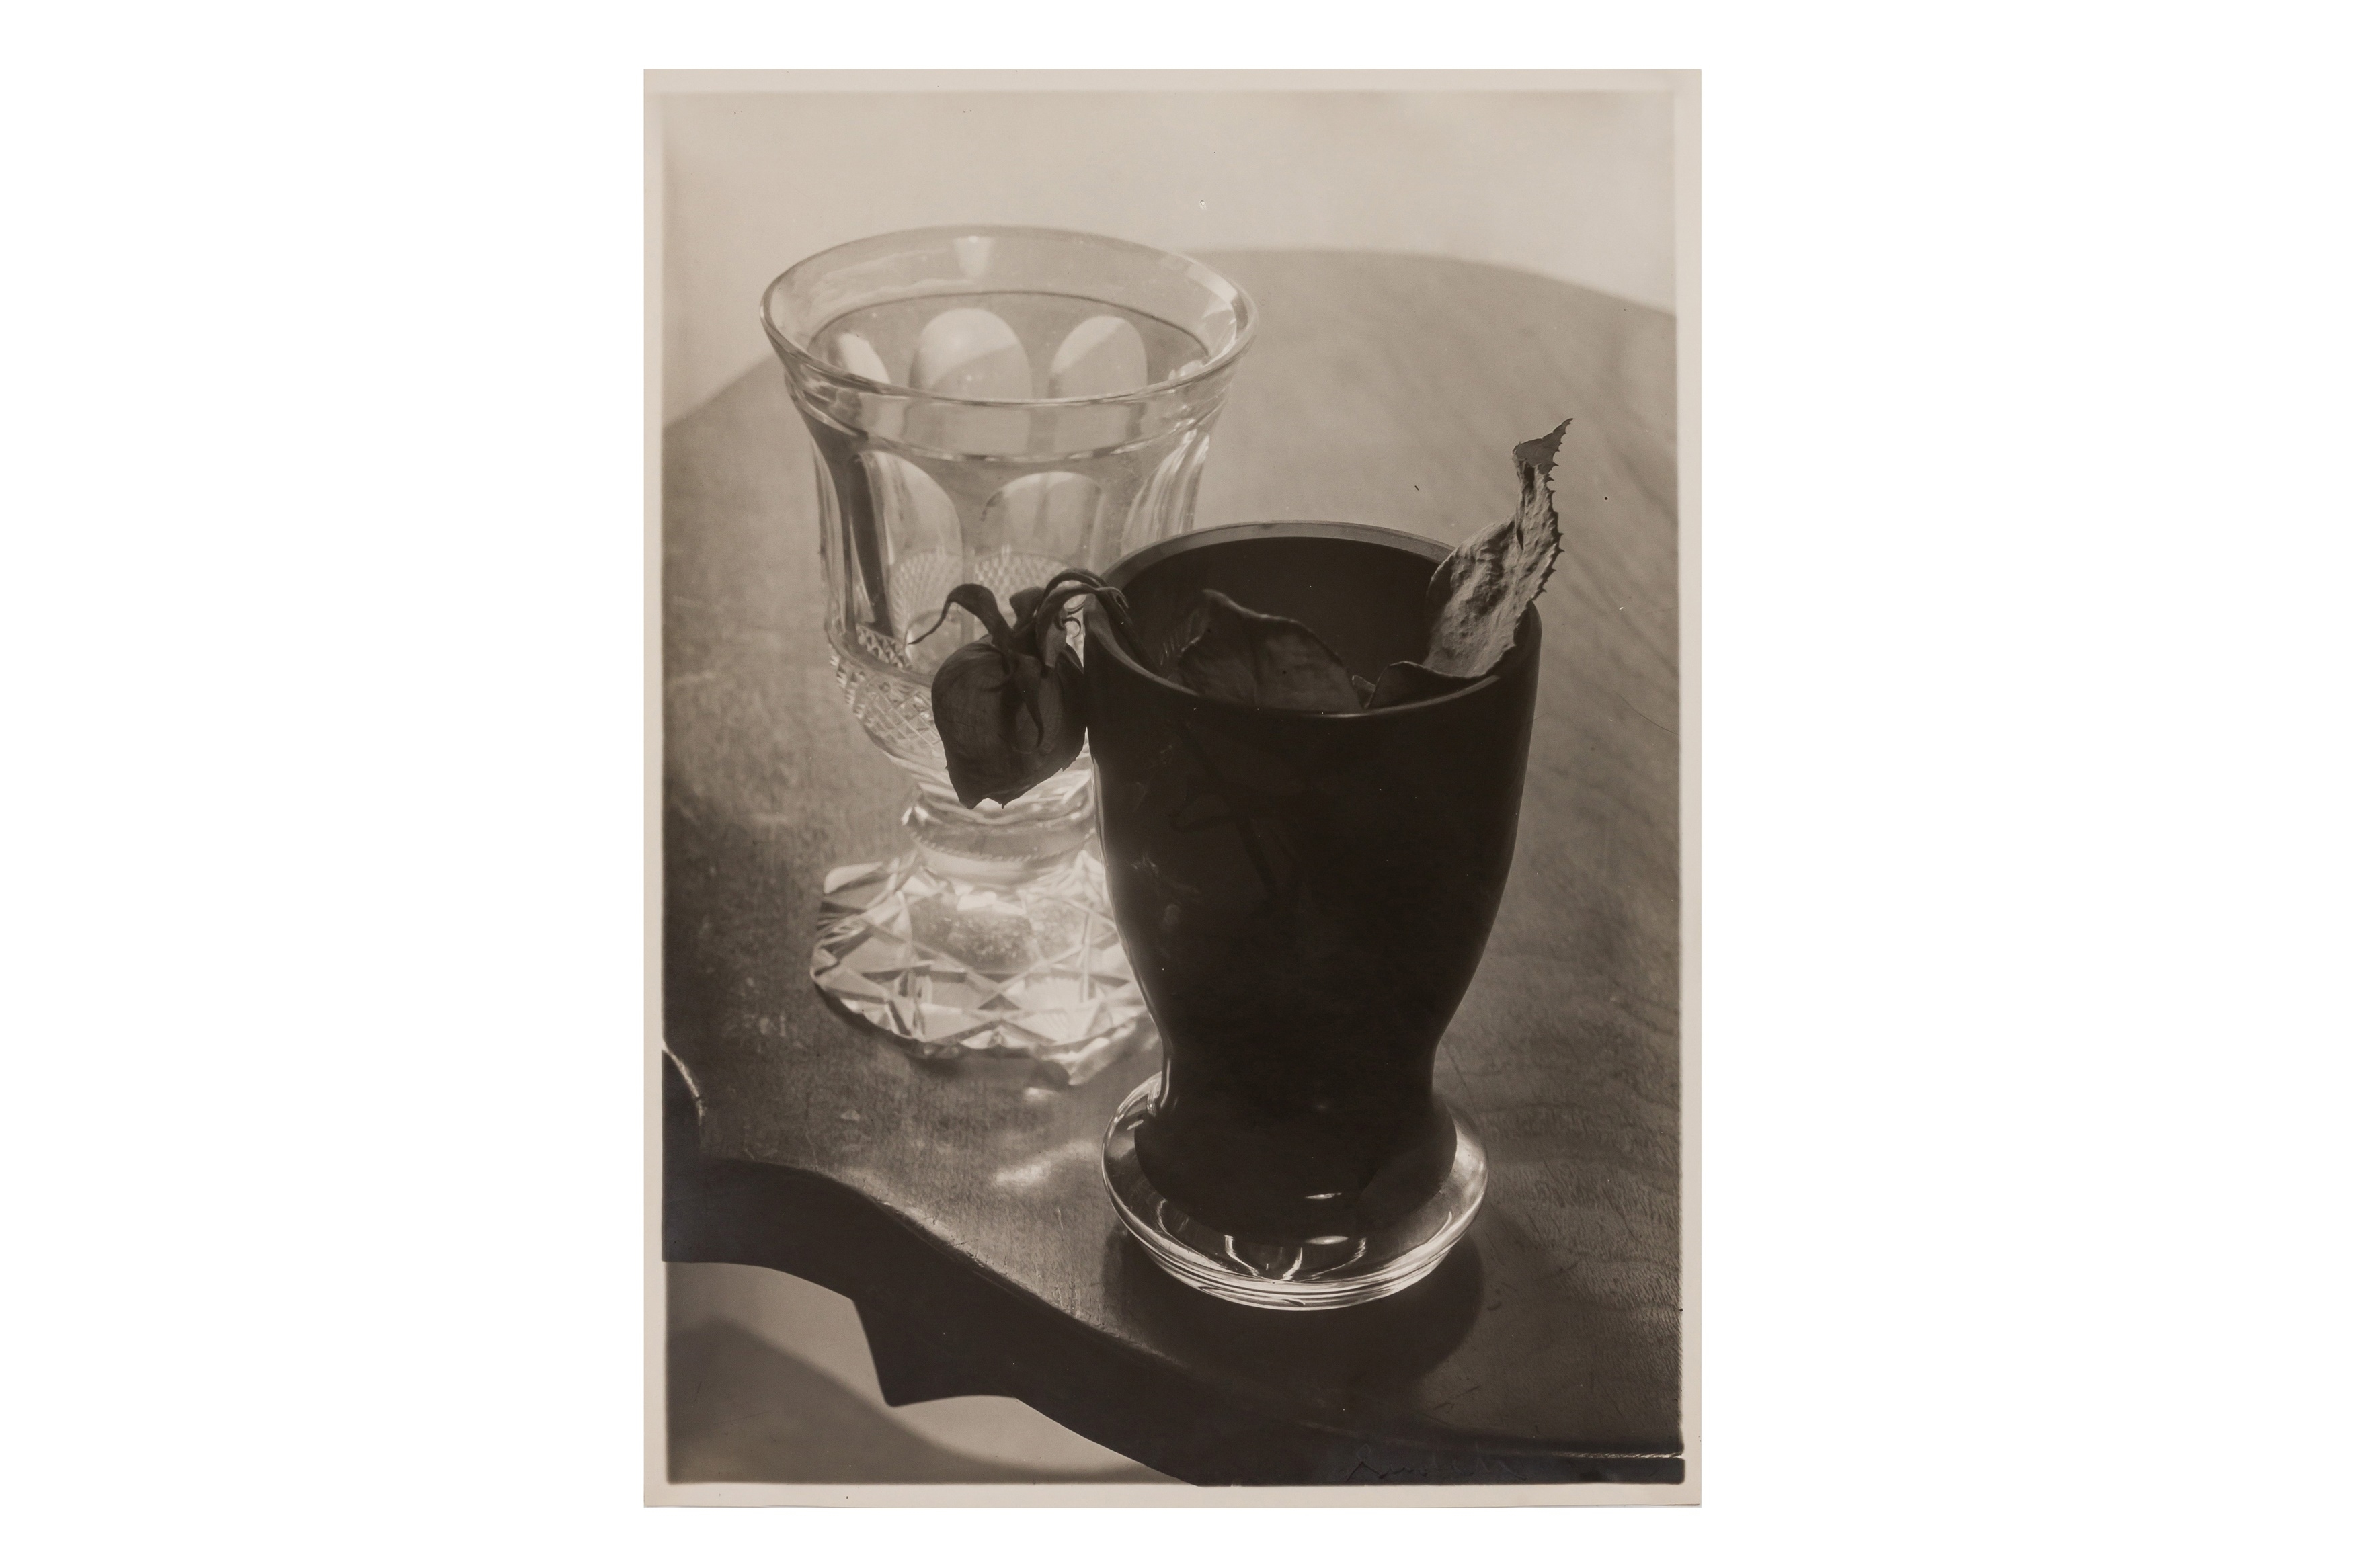 Artwork by Josef Sudek, STILL LIFE WITH GLASSES, Made of Silver gelatin print